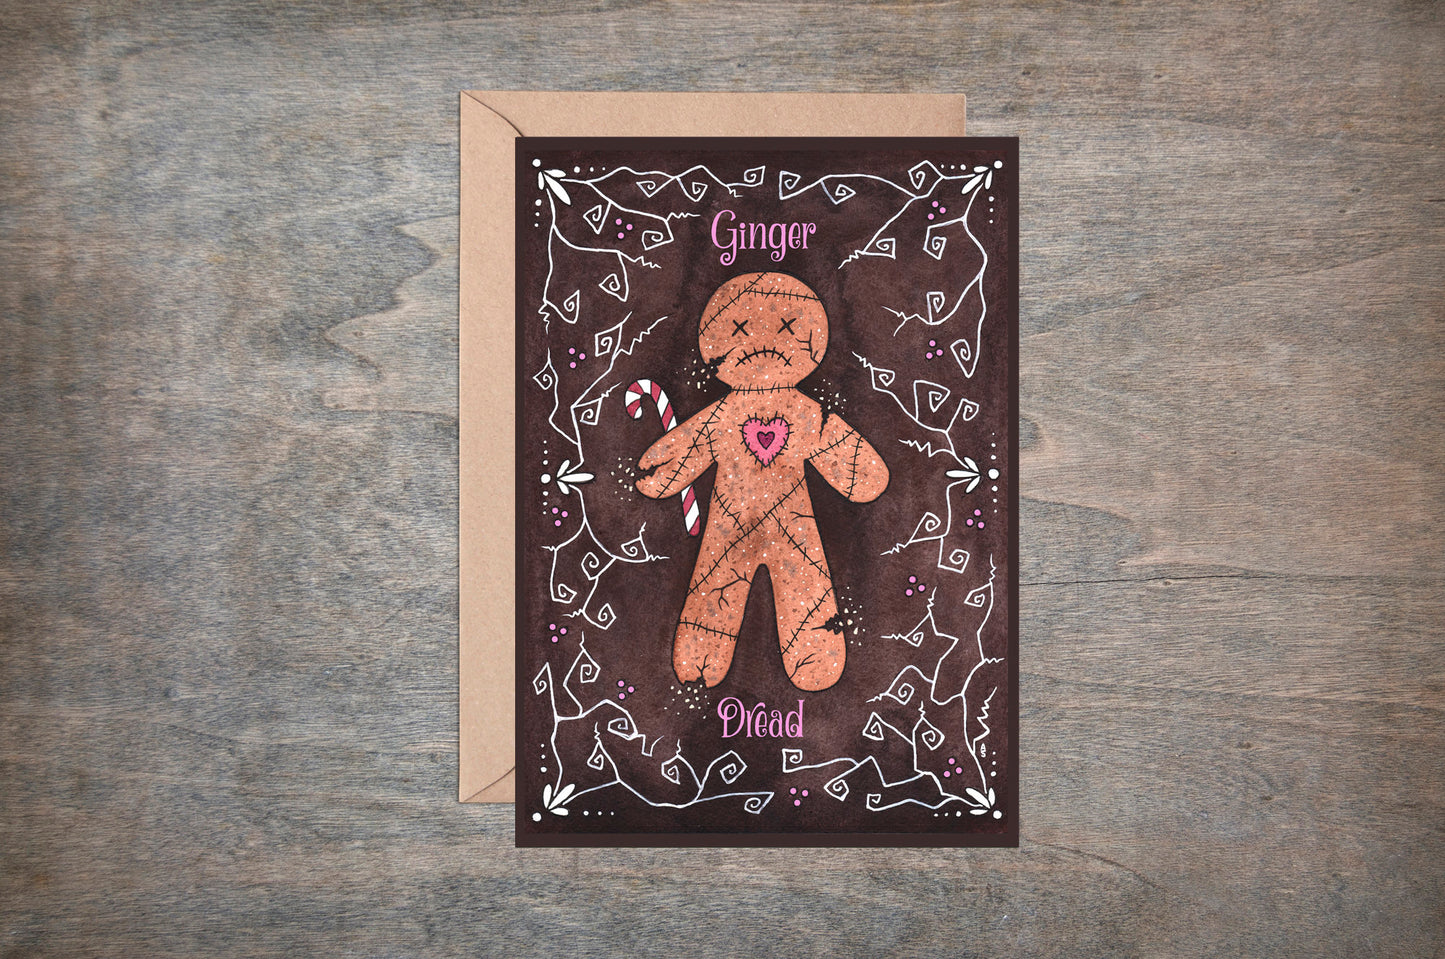 Ginger Dread Greetings Card & Envelope - Gothic Spooky Gingerbread Figure Card - Brown Pink Creepy Cute Bakery Valentine's Love Heart Card